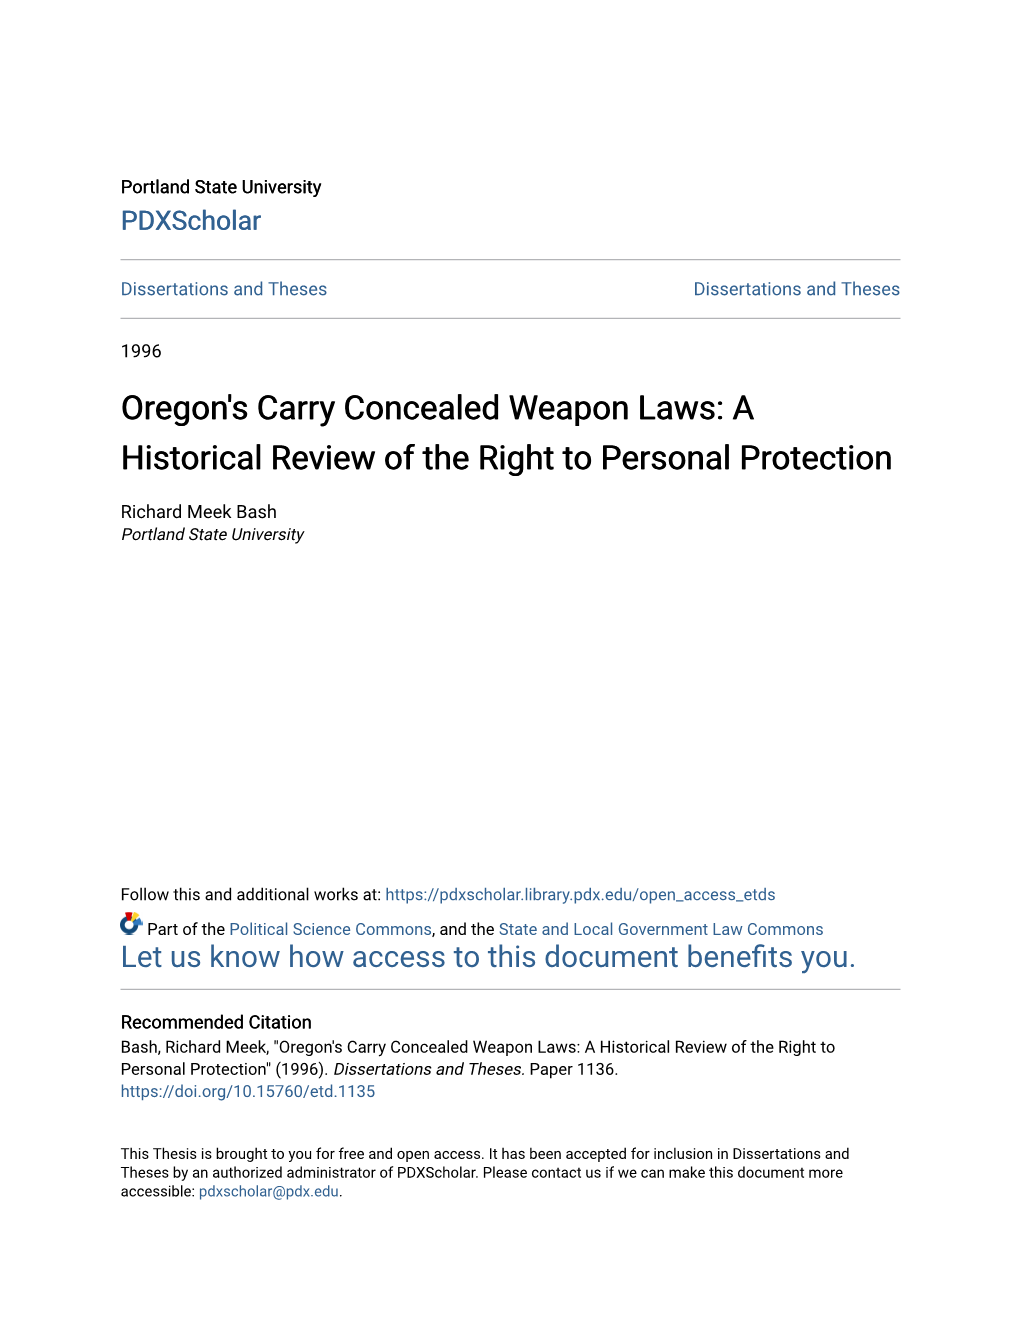 Oregon's Carry Concealed Weapon Laws: a Historical Review of the Right to Personal Protection